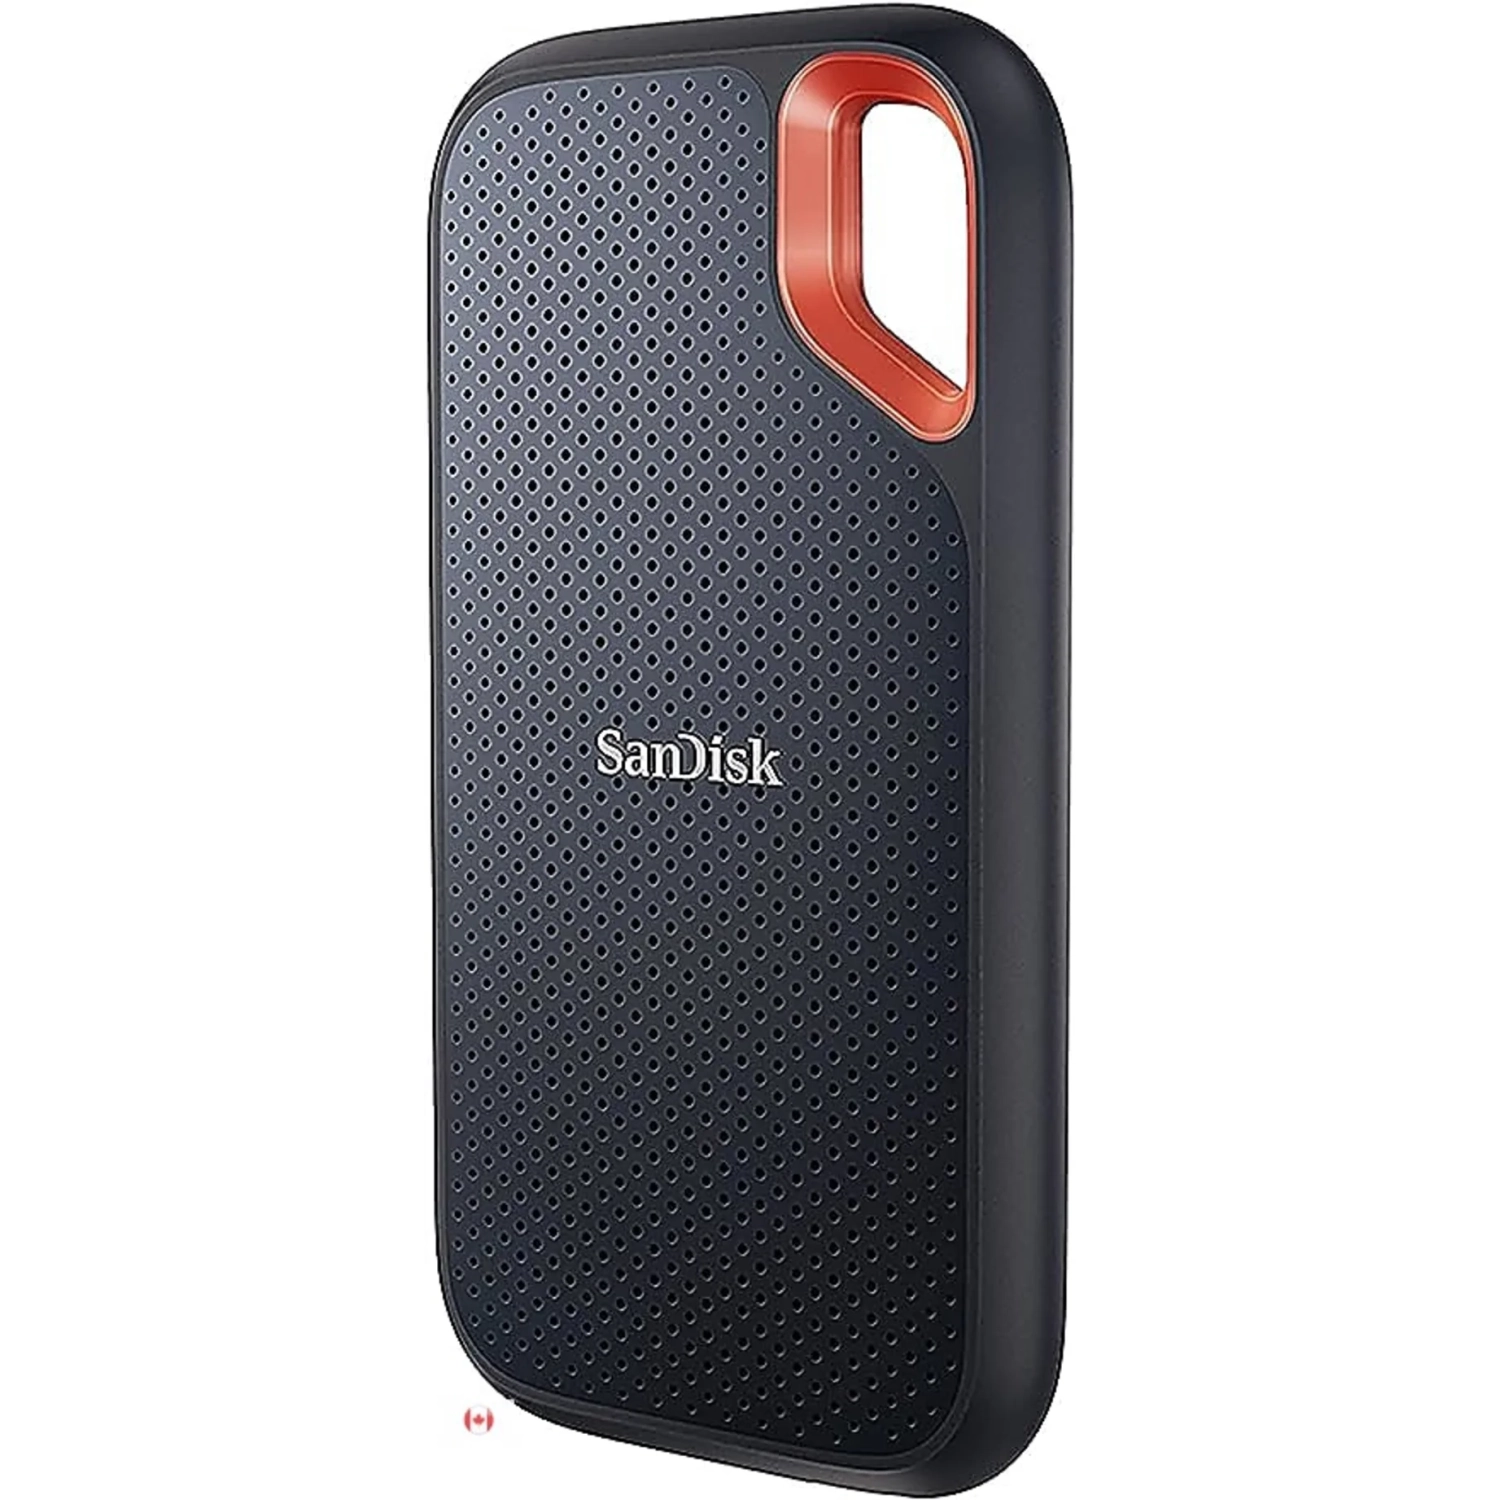 SanDisk 1TB Extreme Portable SSD: Up to 1050MB/s, USB-C, USB 3.2 Gen 2, IP65 Water and Dust Resistance, Updated Firmware - External Solid State Drive (SDSSDE61-1T00-G25)